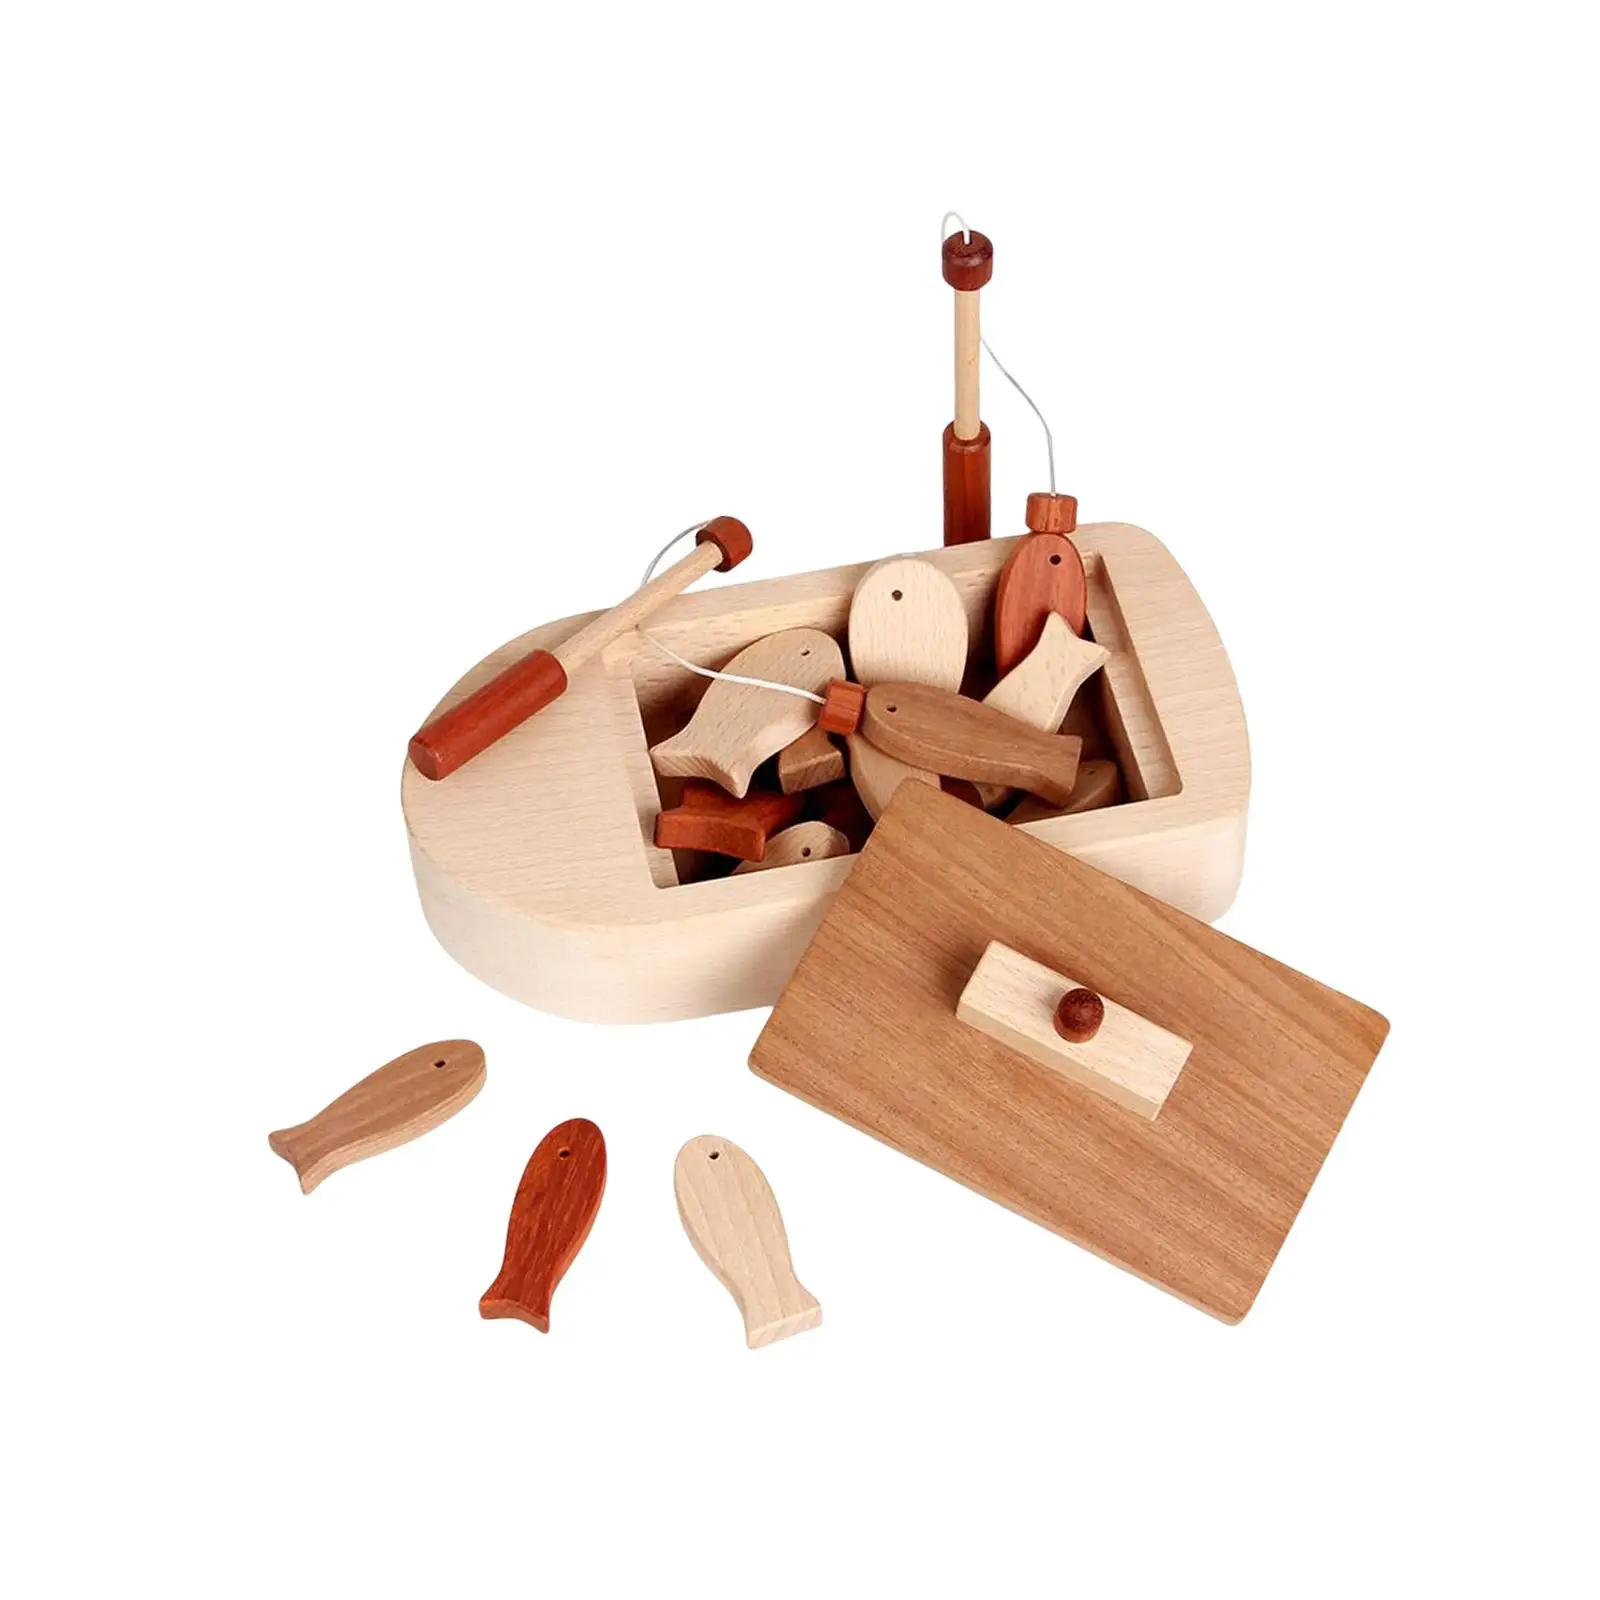 Wooden Fishing Game Play Set Developmental Toys Counting Toys Early Learning for 3 4 5 Years Old Kids Toddler Children